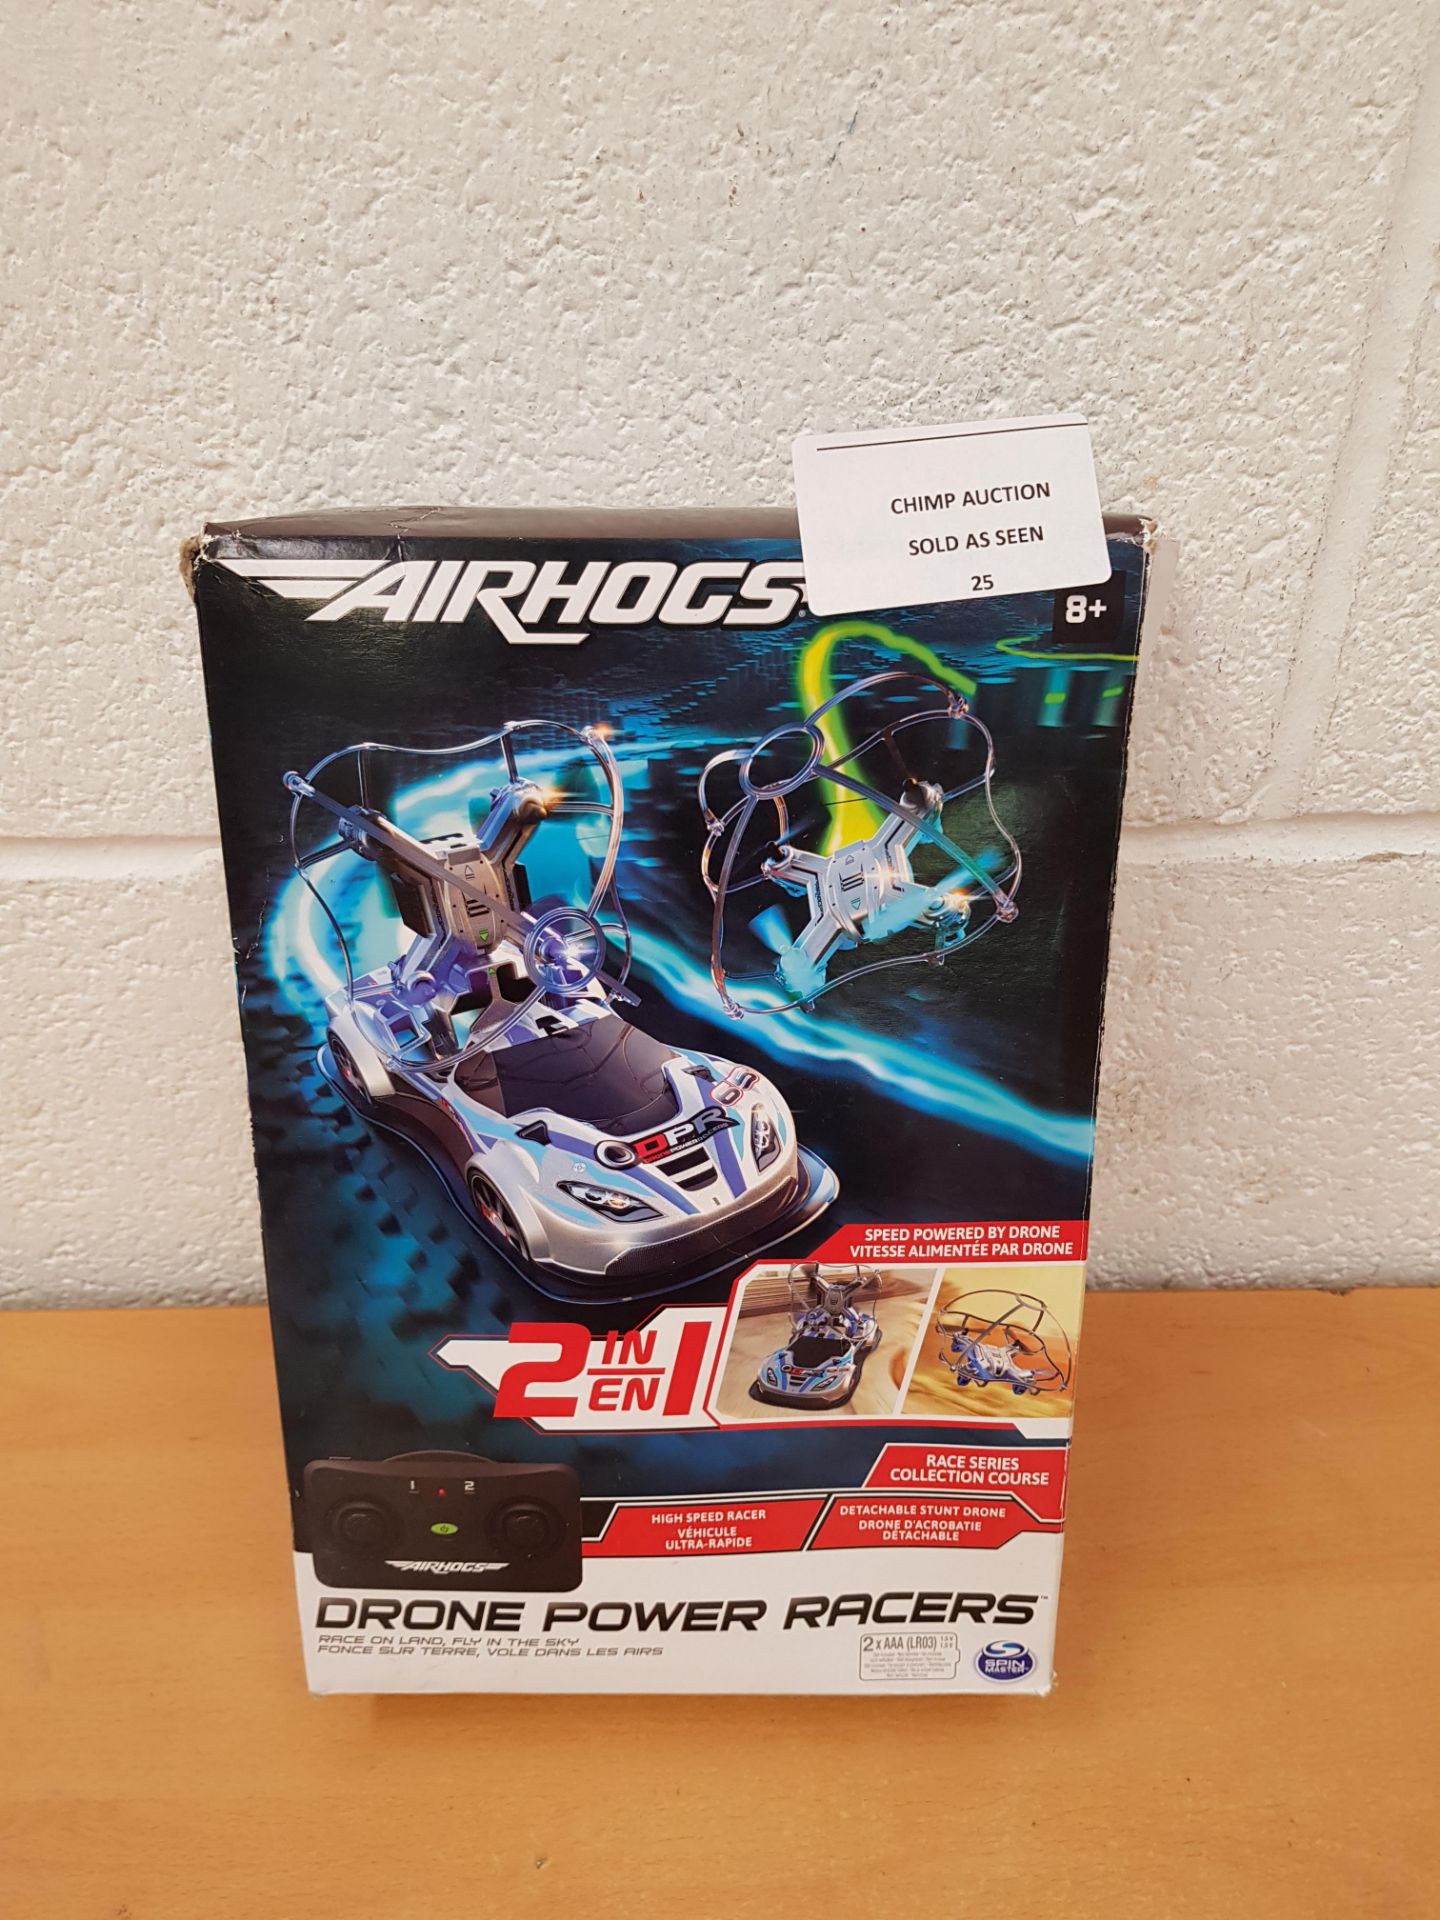 Airhogs 2 in 1 Drone Power Racers